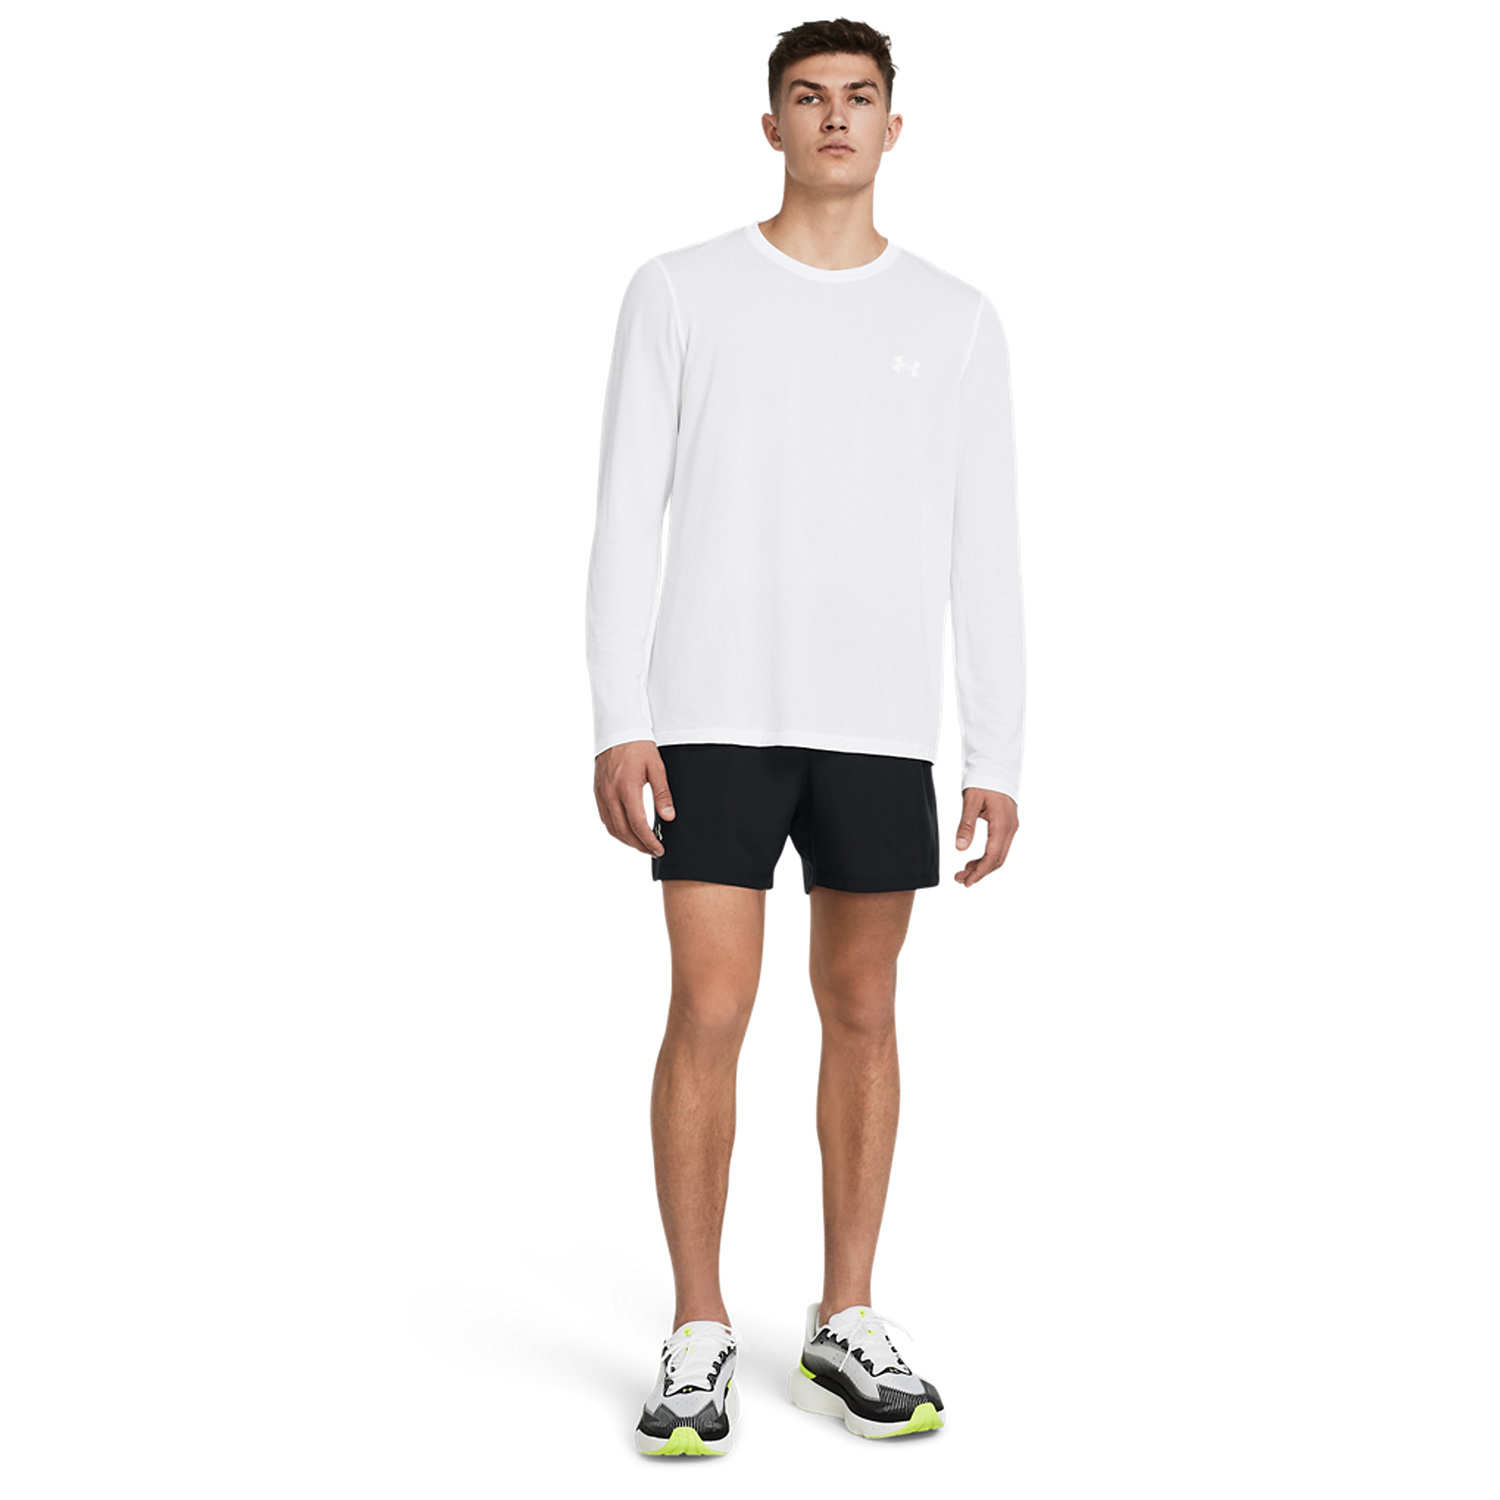 Under Armour Launch 5in Shorts - Black/Reflective